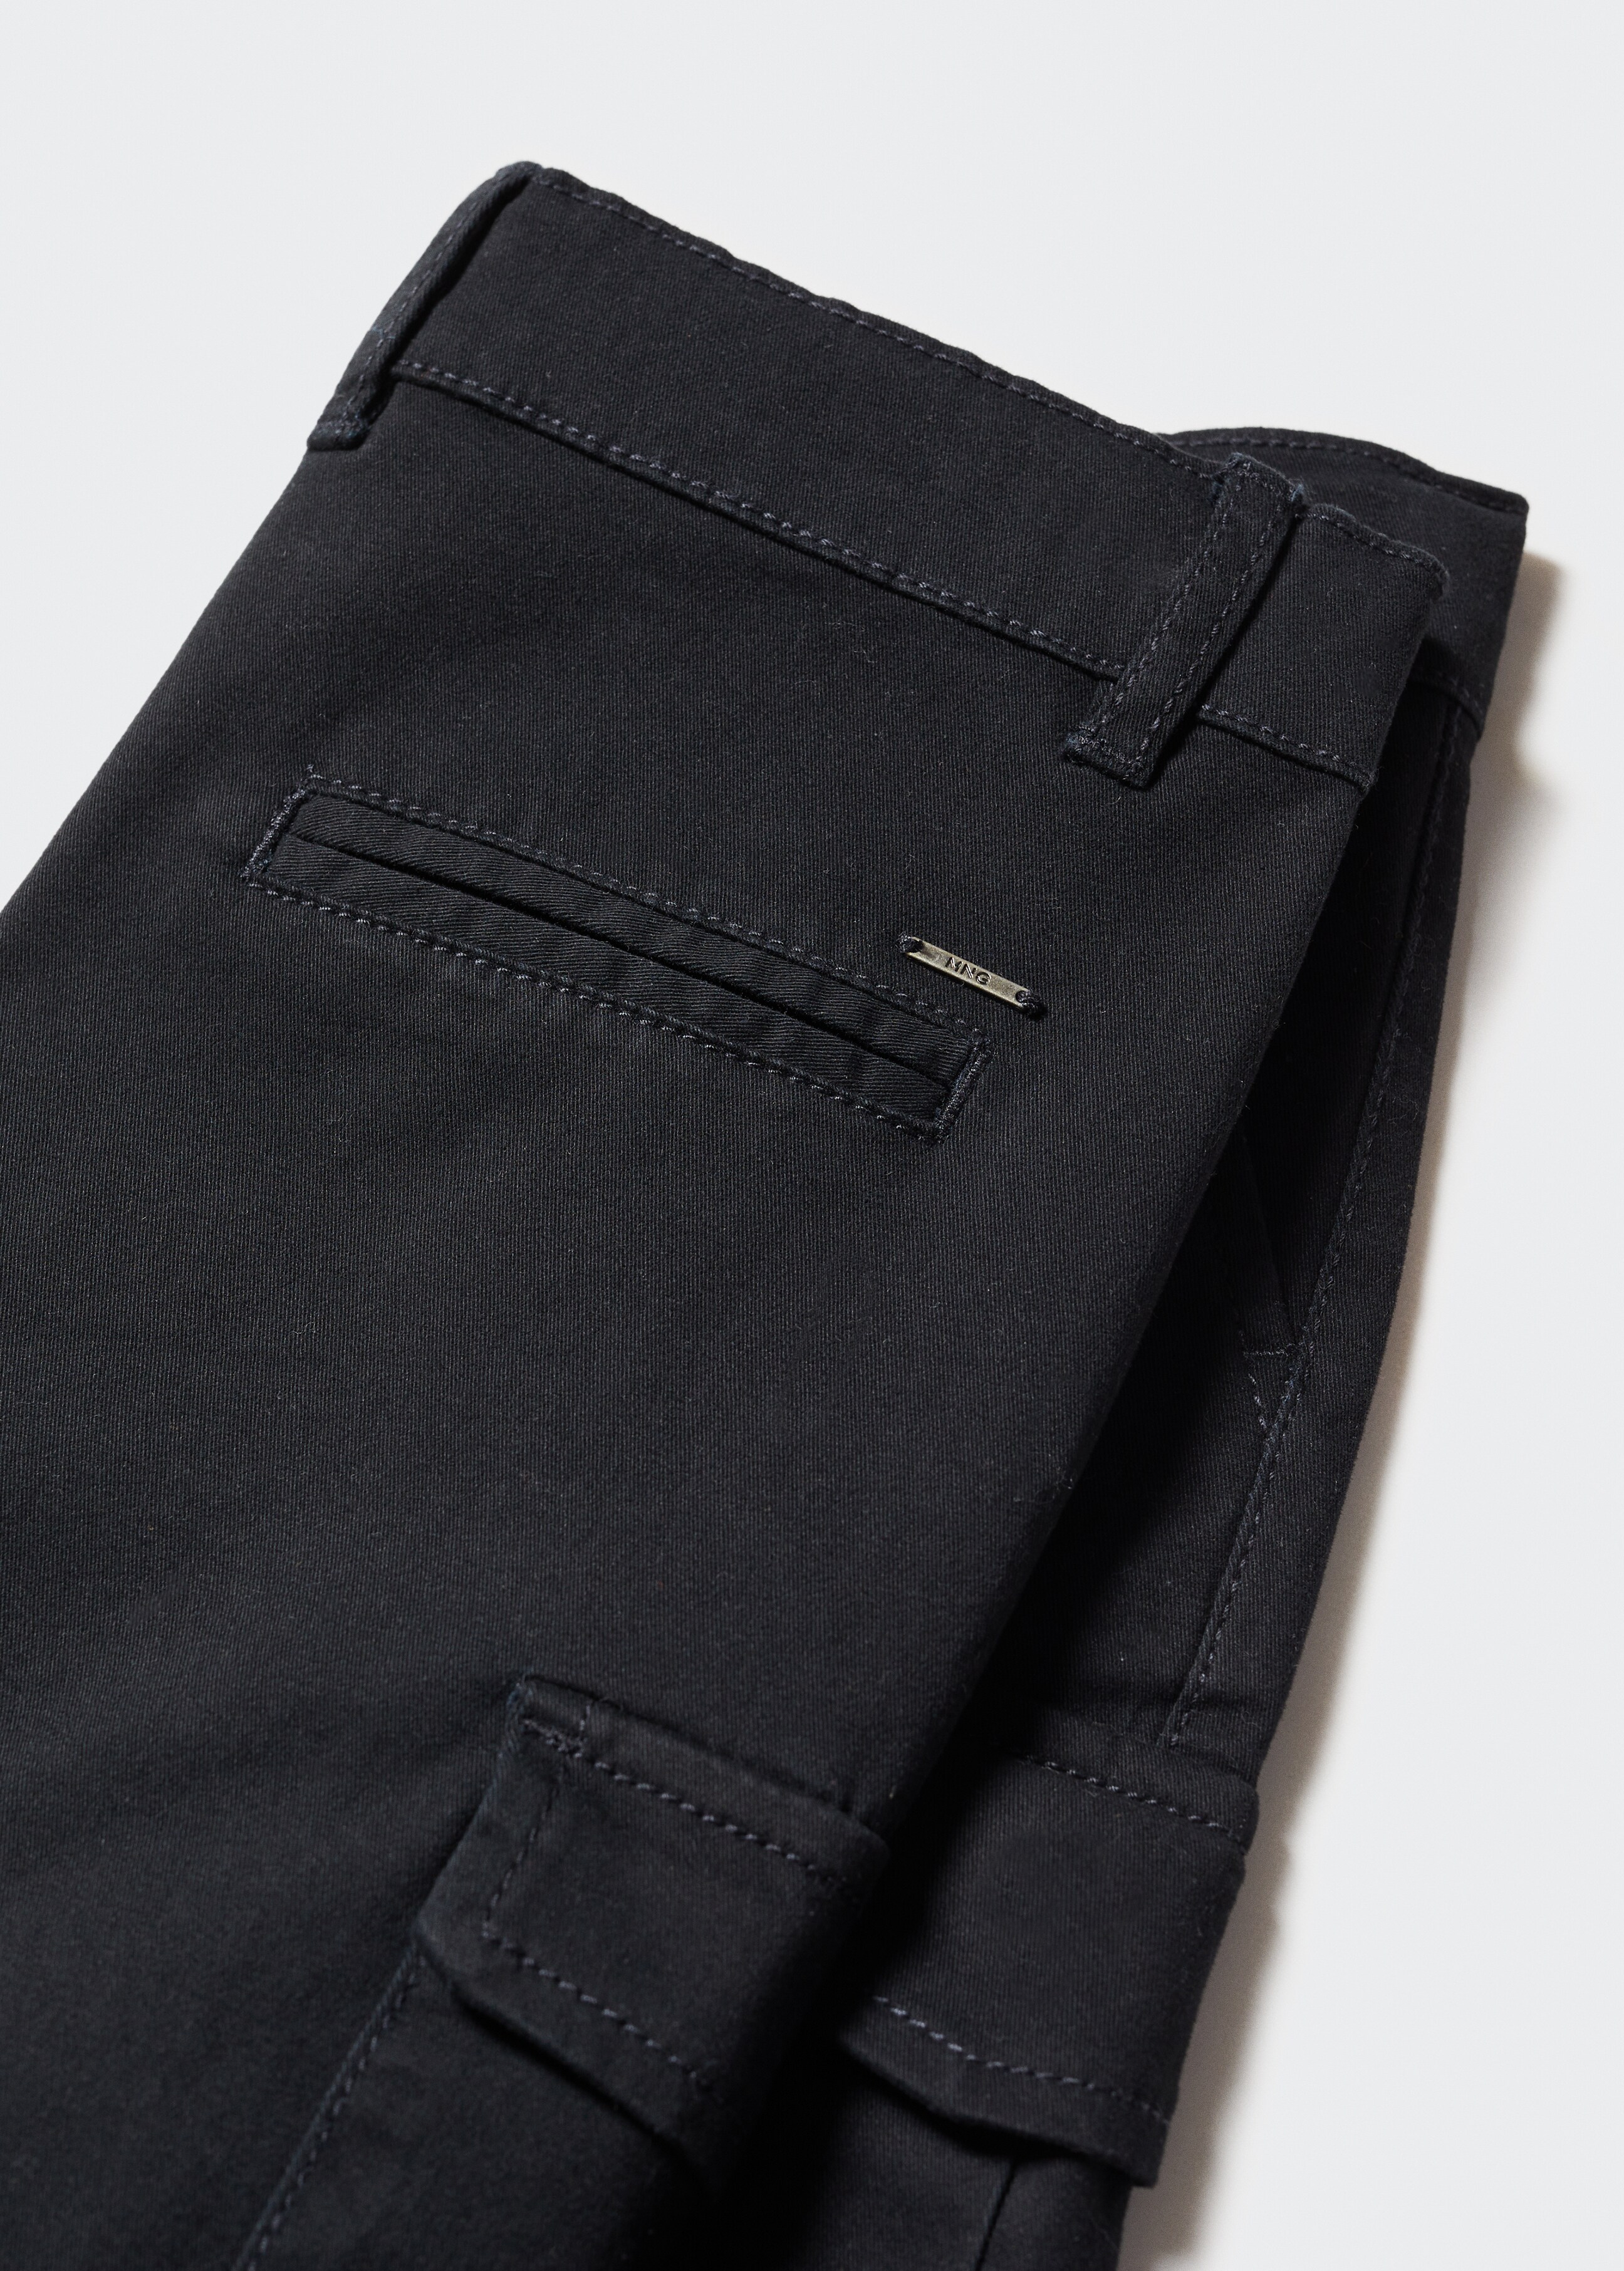 Cargo Bermuda shorts - Details of the article 8